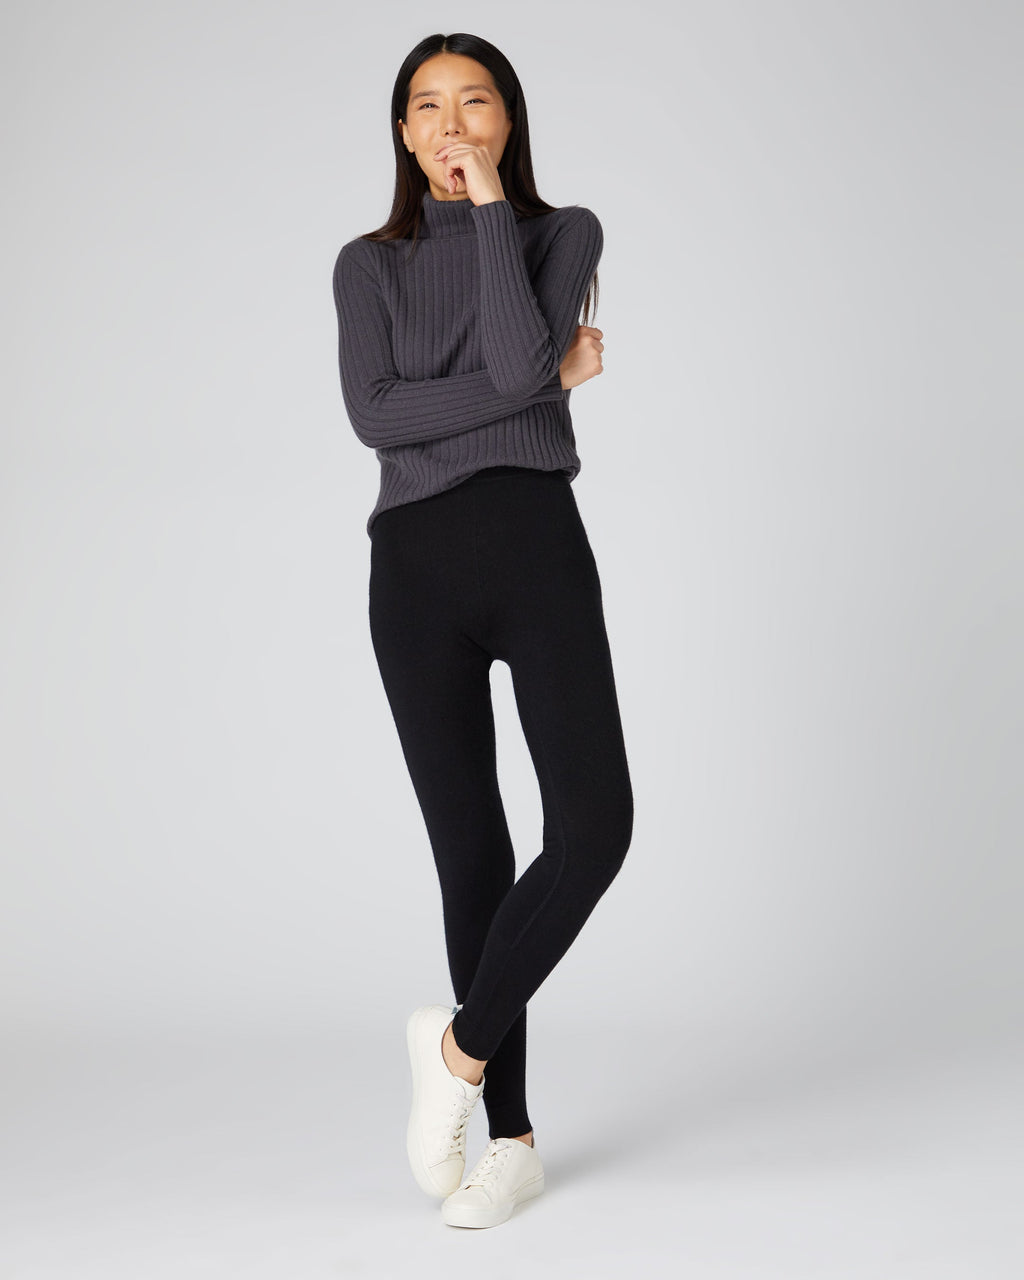 Winter Skinny Black Leggings With Thick Velvet Wool Fleece And Lambskin  Cashmere For Women And Girls Warm Thermal Trousers Womens 211215 From  Luo02, $14.24